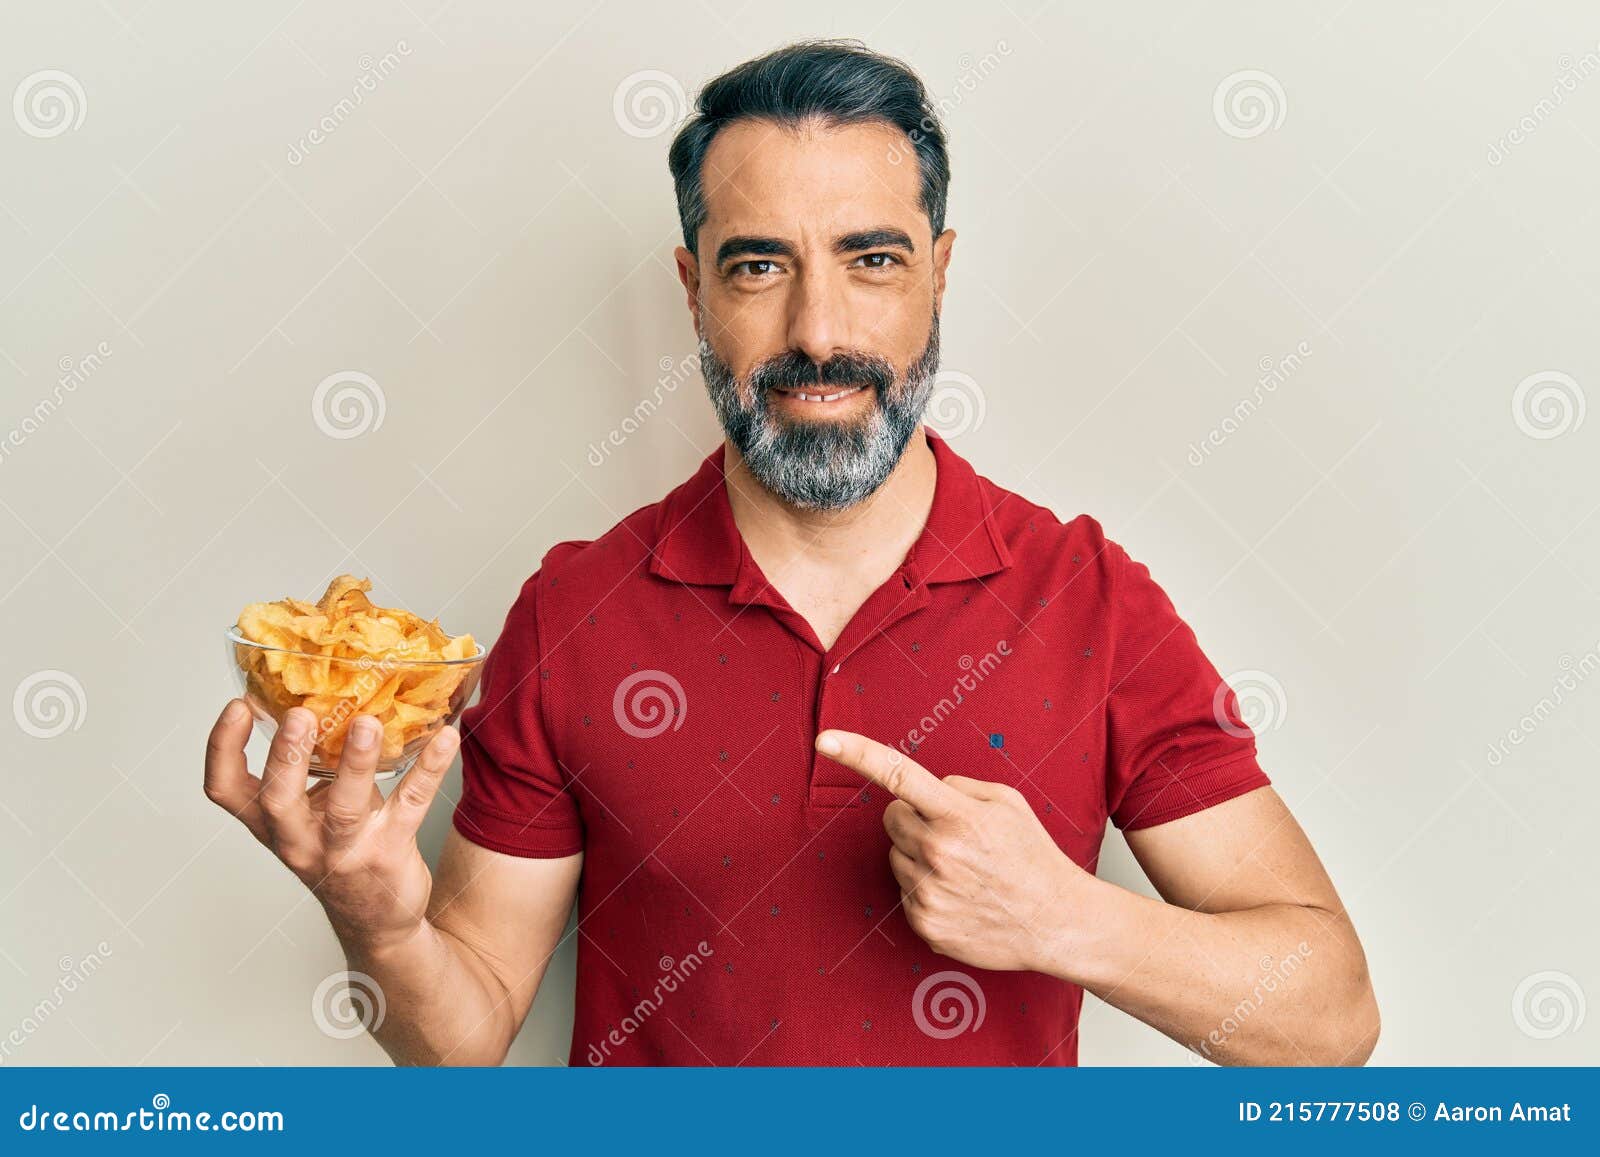 Middle Age Man with Beard and Grey Hair Holding Potato Chip Smiling Happy  Pointing with Hand and Finger Stock Photo - Image of middle, attractive:  215777508